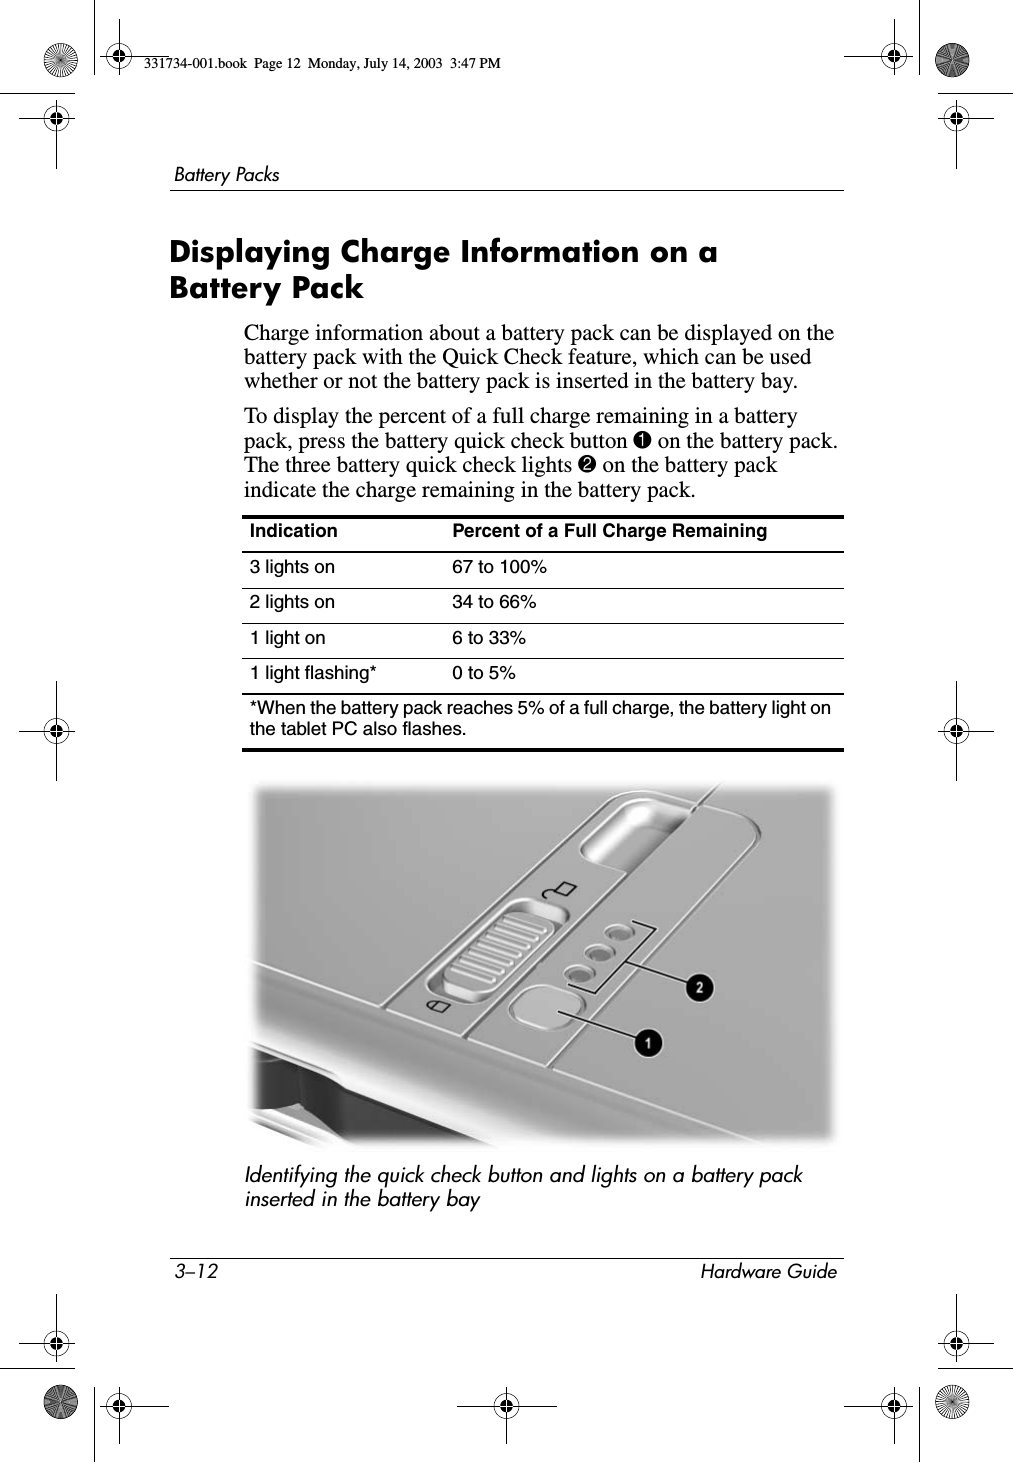 3–12 Hardware GuideBattery PacksDisplaying Charge Information on a Battery PackCharge information about a battery pack can be displayed on the battery pack with the Quick Check feature, which can be used whether or not the battery pack is inserted in the battery bay.To display the percent of a full charge remaining in a battery pack, press the battery quick check button 1 on the battery pack. The three battery quick check lights 2 on the battery pack indicate the charge remaining in the battery pack.Identifying the quick check button and lights on a battery pack inserted in the battery bayIndication Percent of a Full Charge Remaining3 lights on 67 to 100%2 lights on 34 to 66%1 light on 6 to 33%1 light flashing* 0 to 5%*When the battery pack reaches 5% of a full charge, the battery light on the tablet PC also flashes.331734-001.book  Page 12  Monday, July 14, 2003  3:47 PM